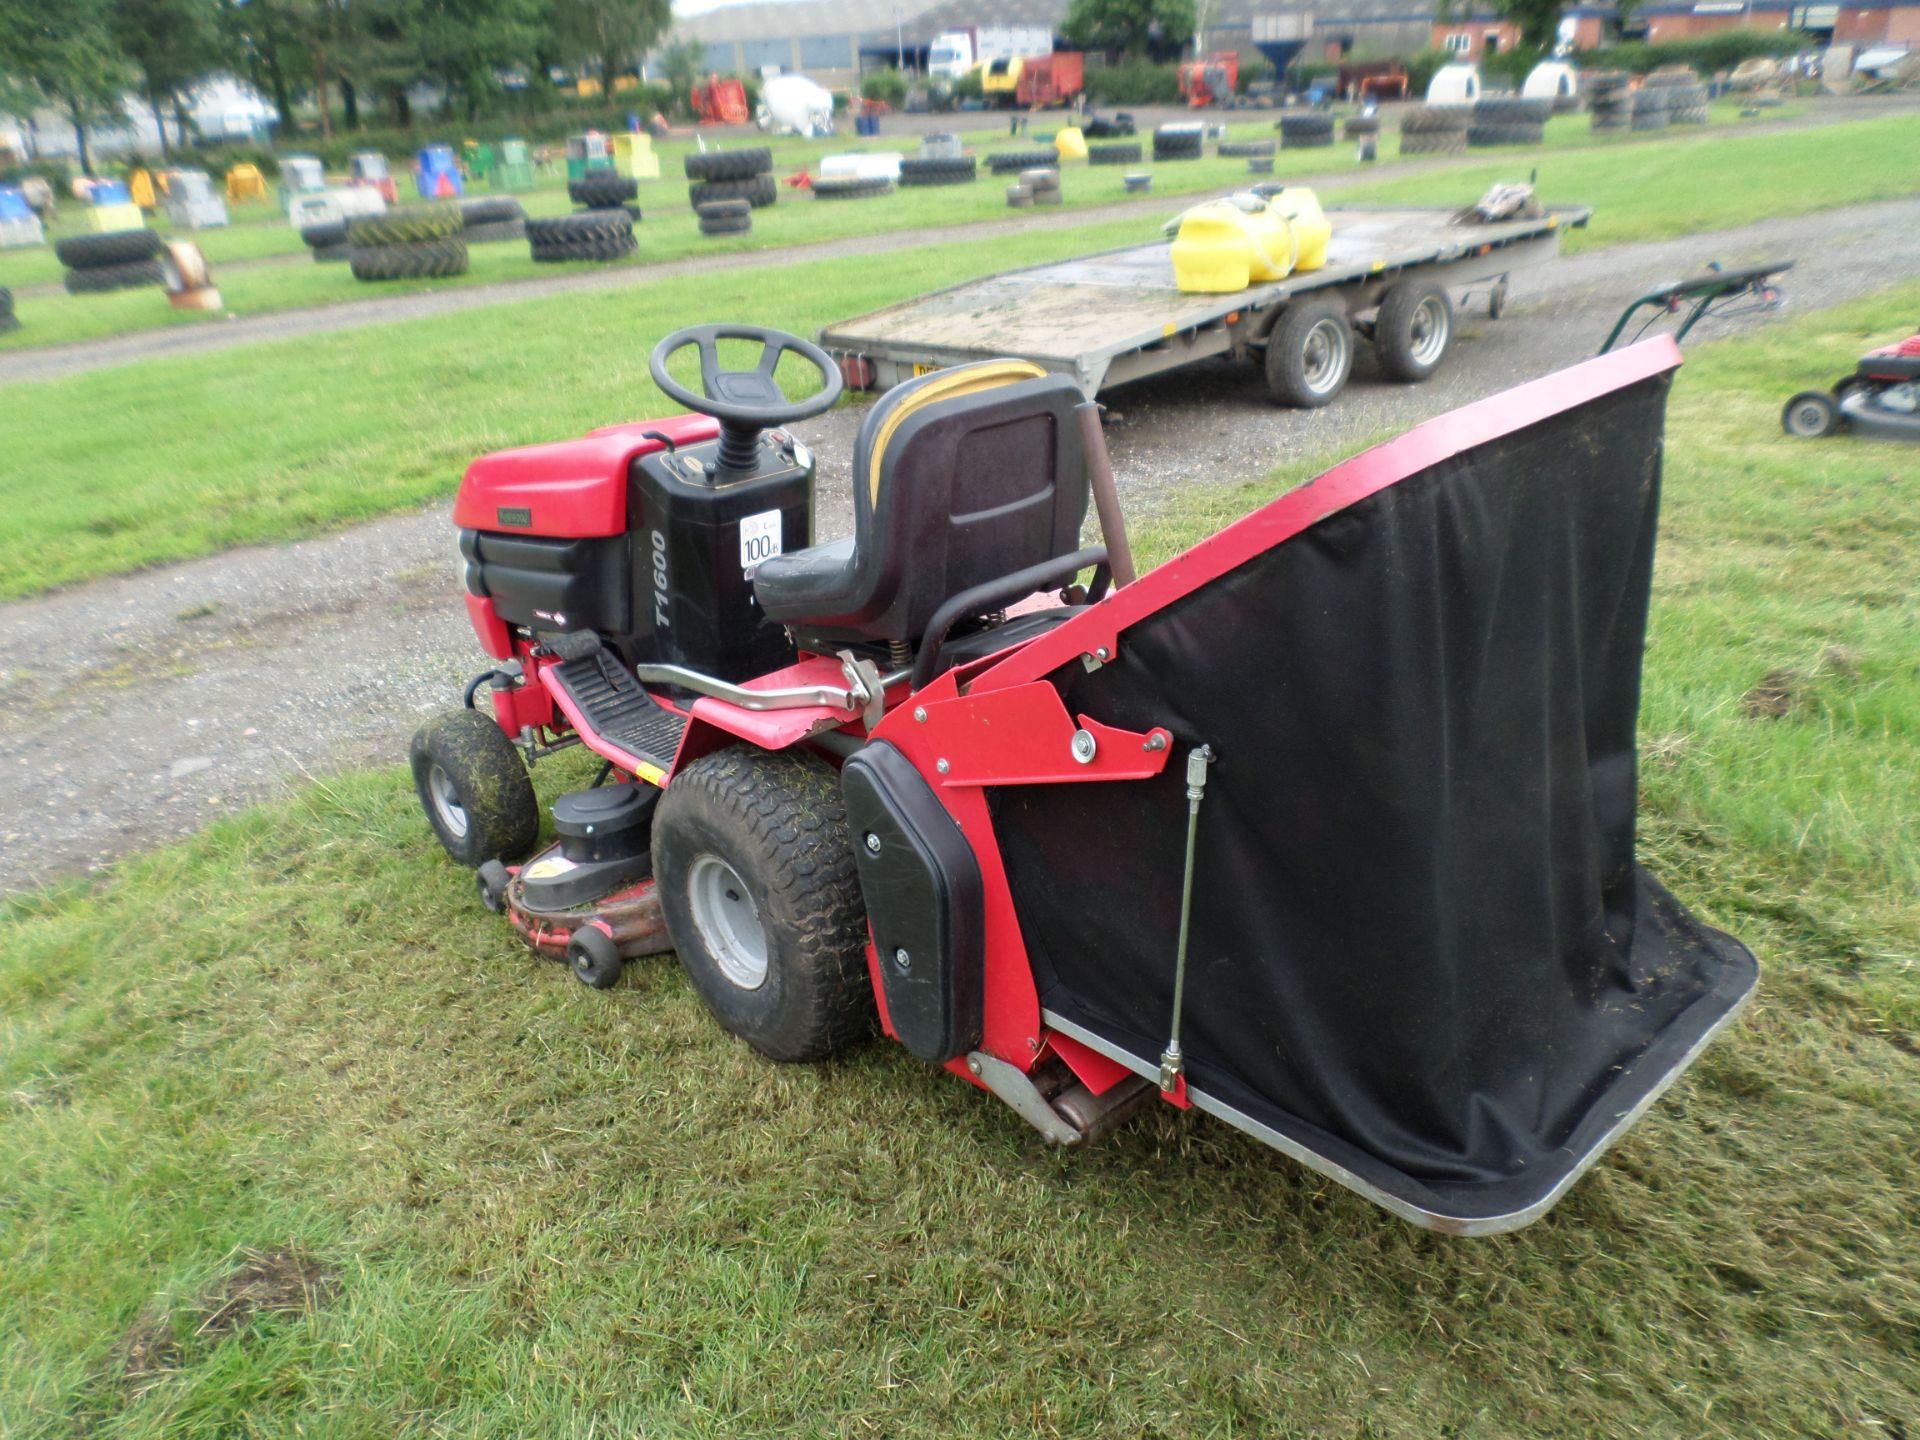 Westwood T1600 ride on mower part exchange machine used this season but not serviced, owers manual & - Image 3 of 3